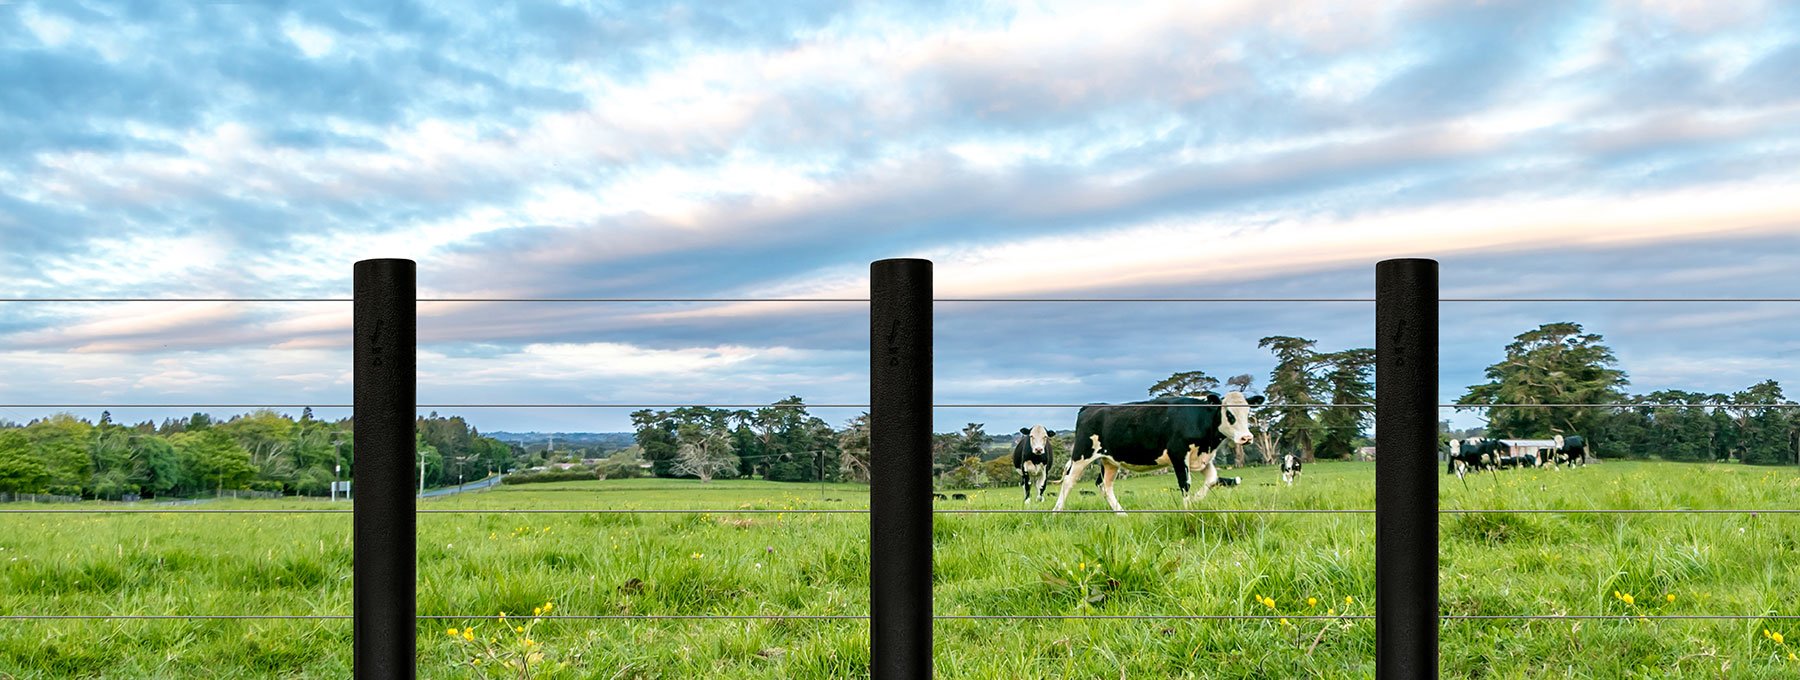 Futurepost fence design with cows in background